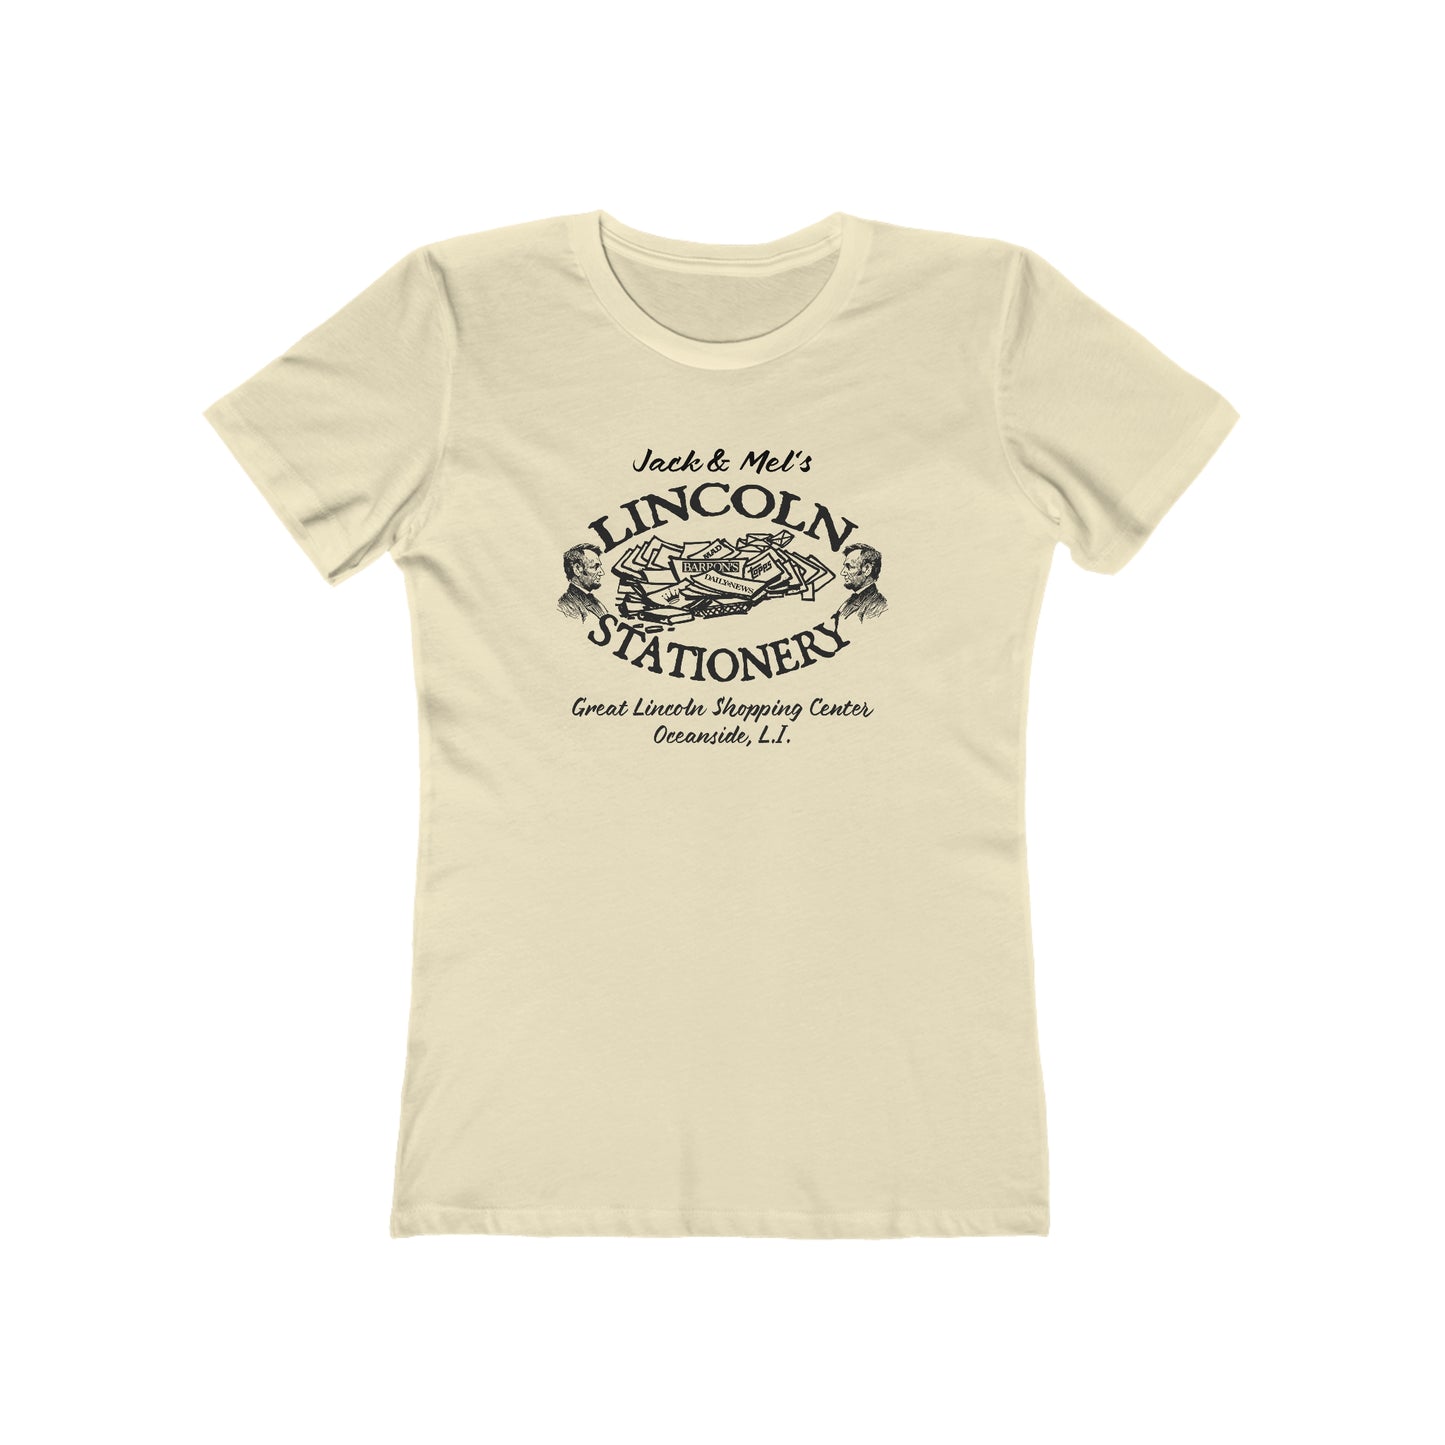 Lincoln Stationery - Women's T-Shirt